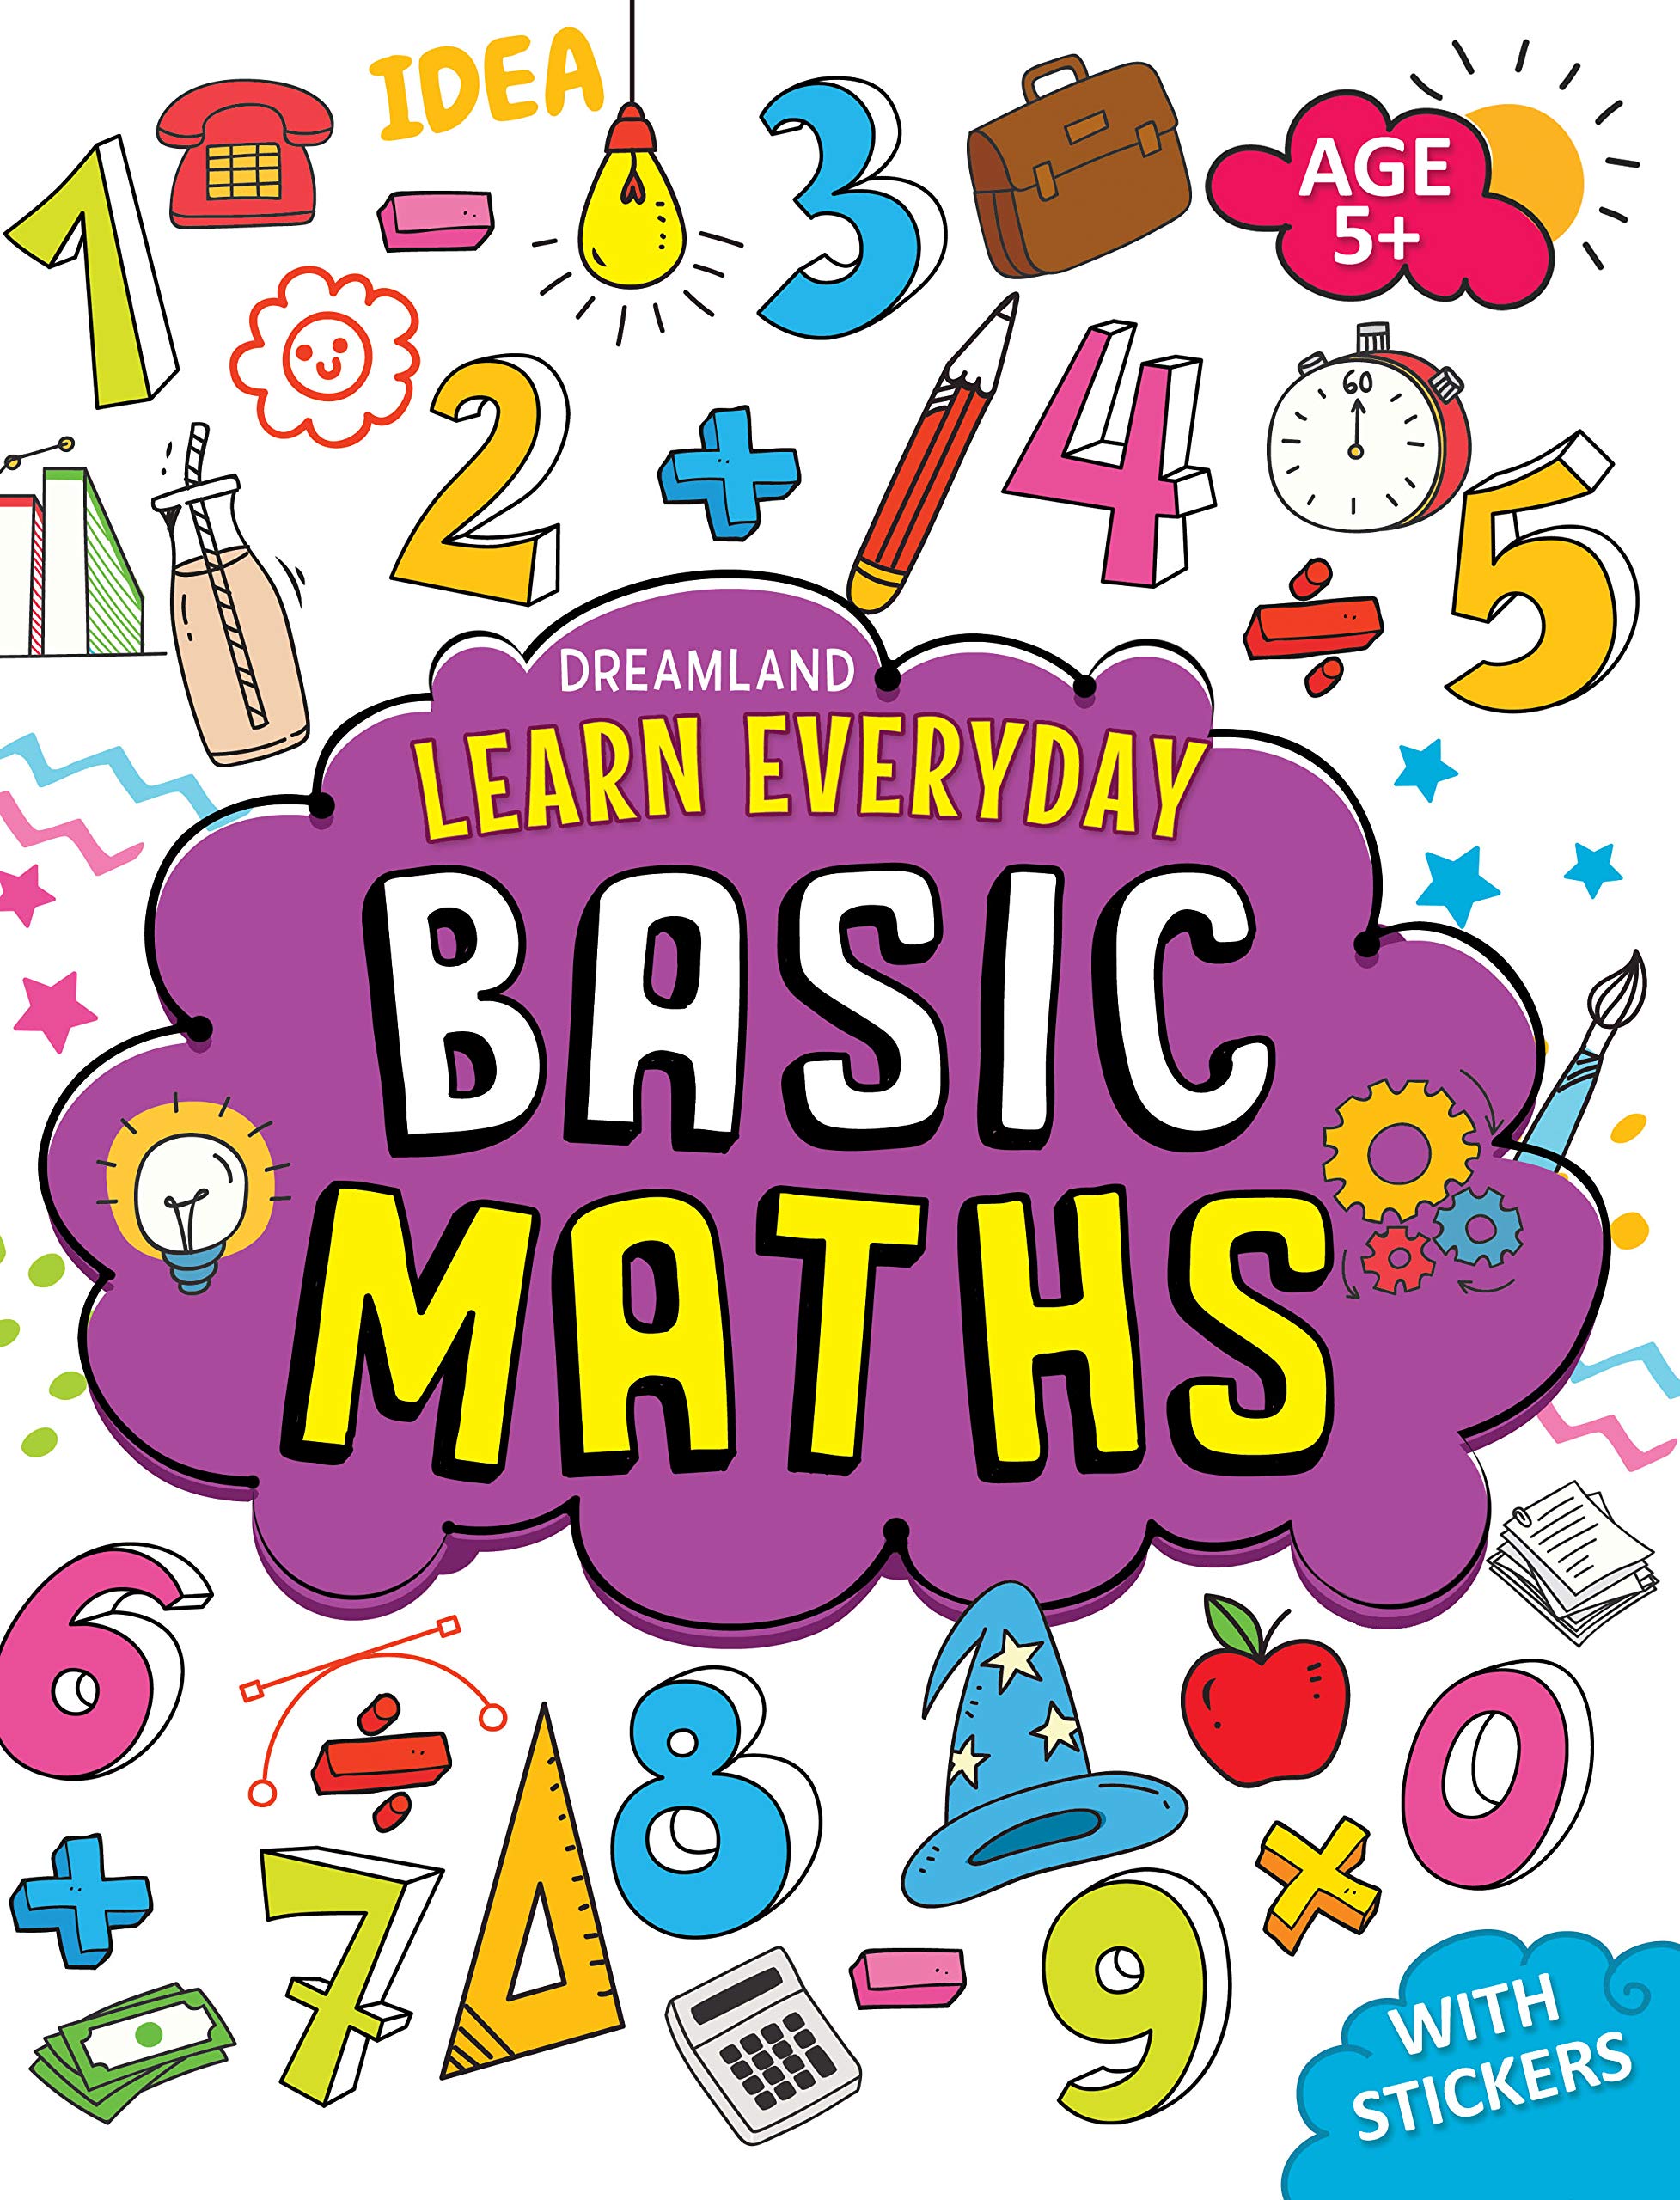 Basic Maths with Stickers - Learn Everyday Series For Children Paperback